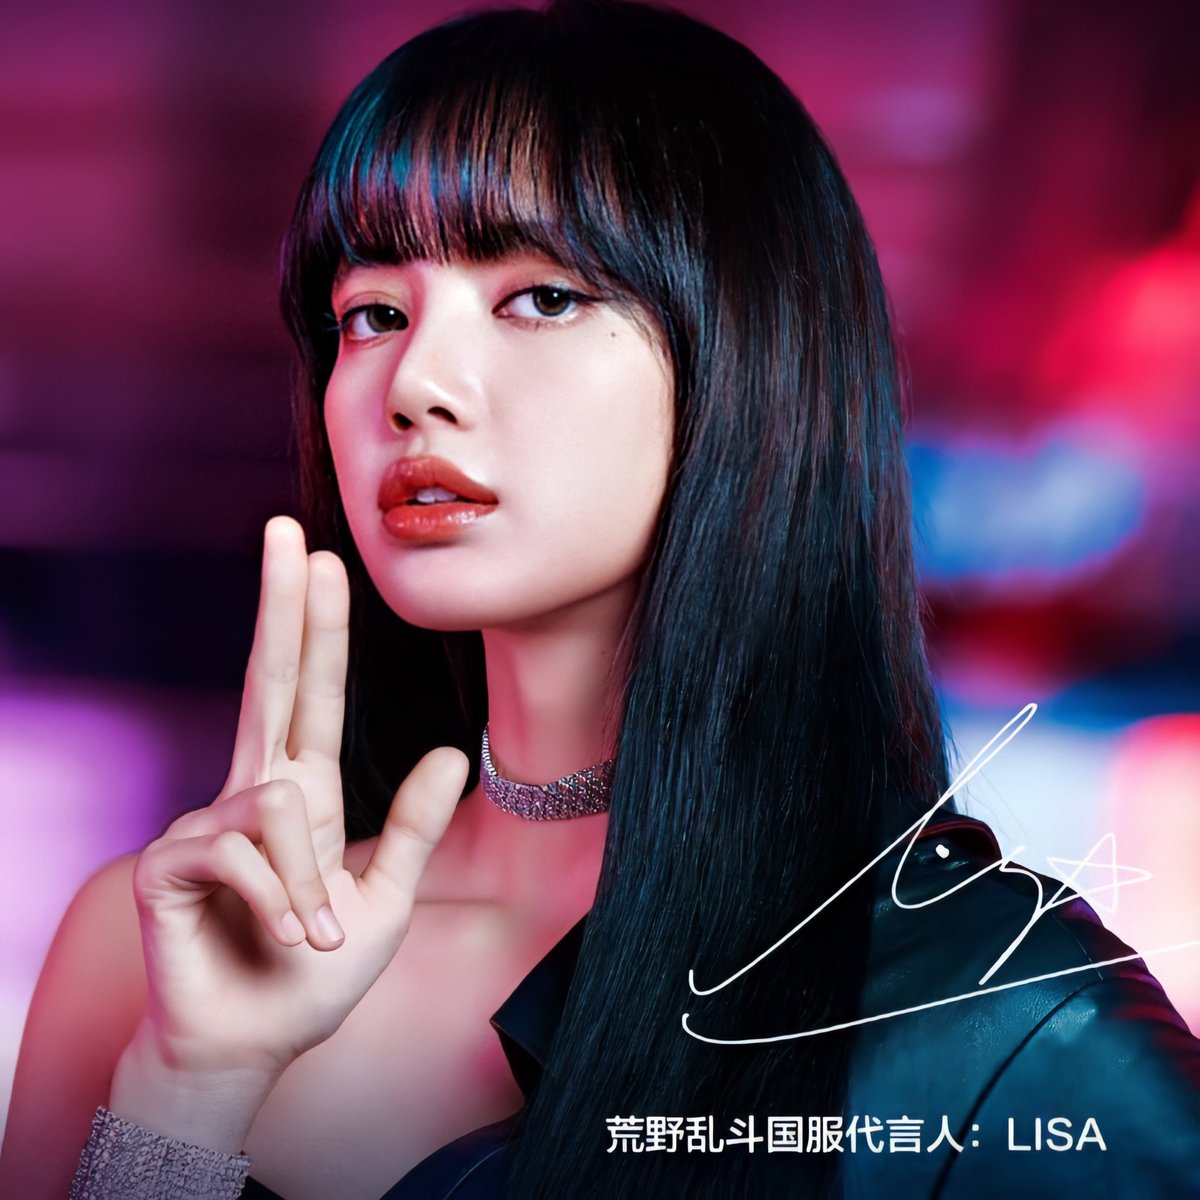 Lisa is the first brand spokesperson for tencent’s brawl stars. it's the largest gaming company in China, with popular games such as PUBG & Fortnite.